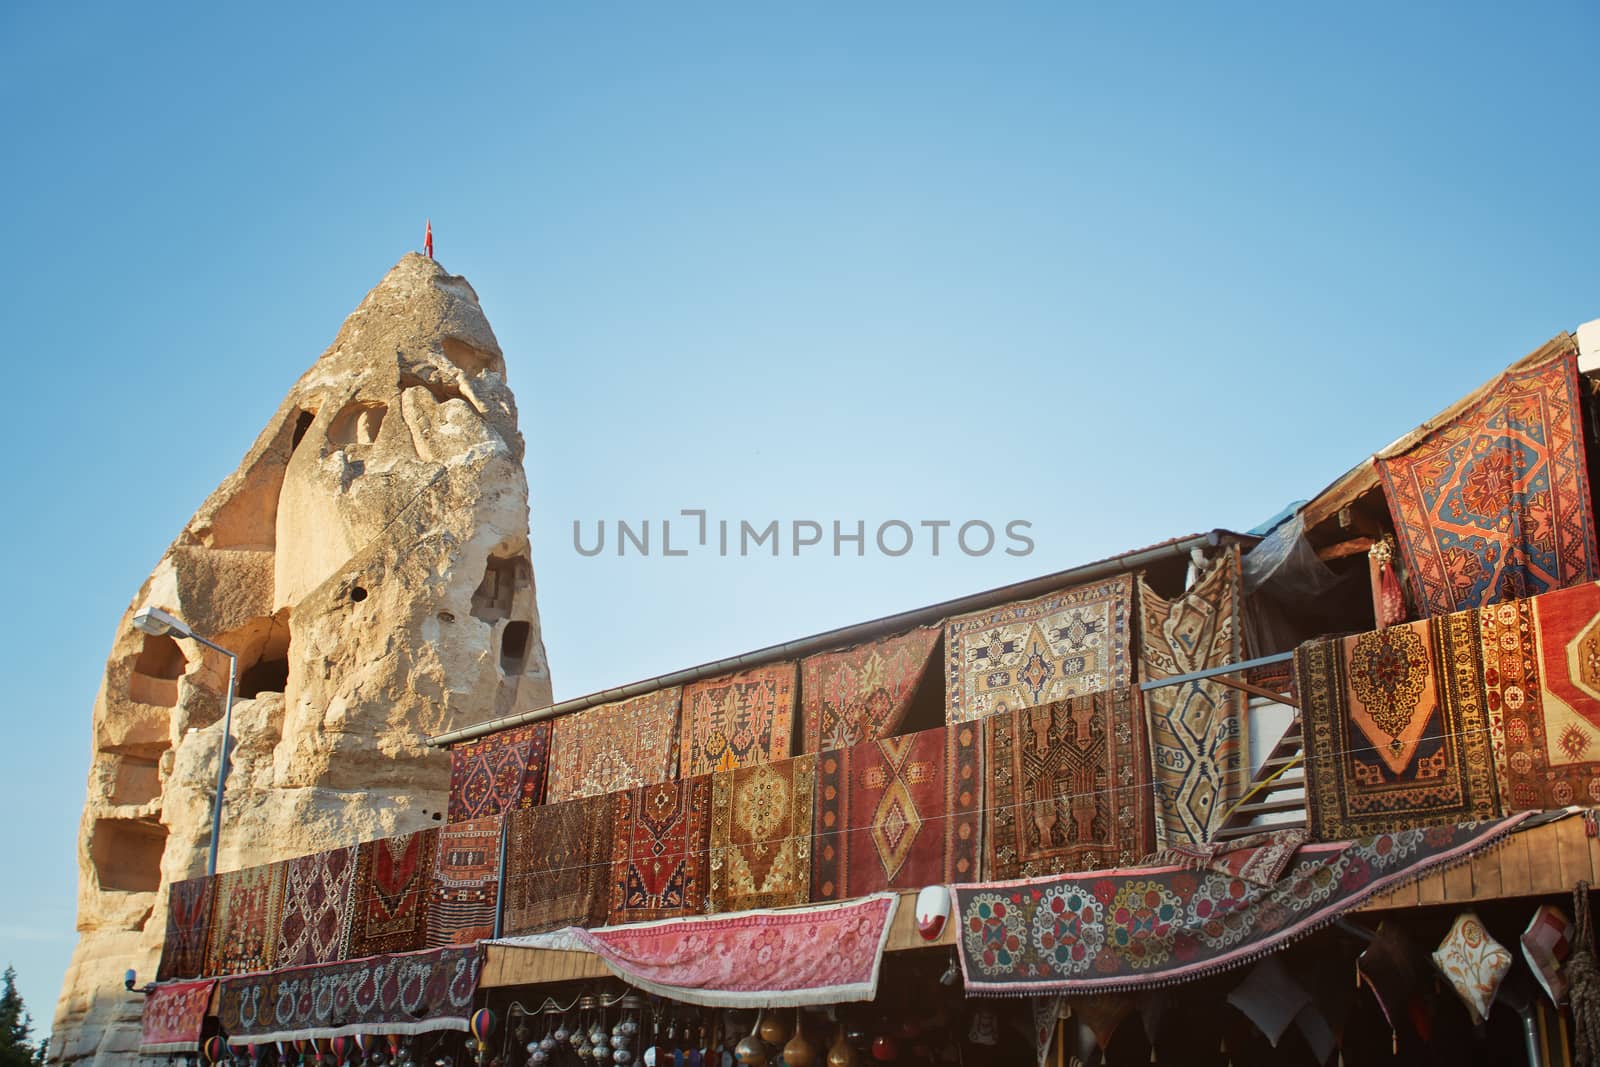 Outdoors shop with carpets for sale. Cappadocia, Turkey